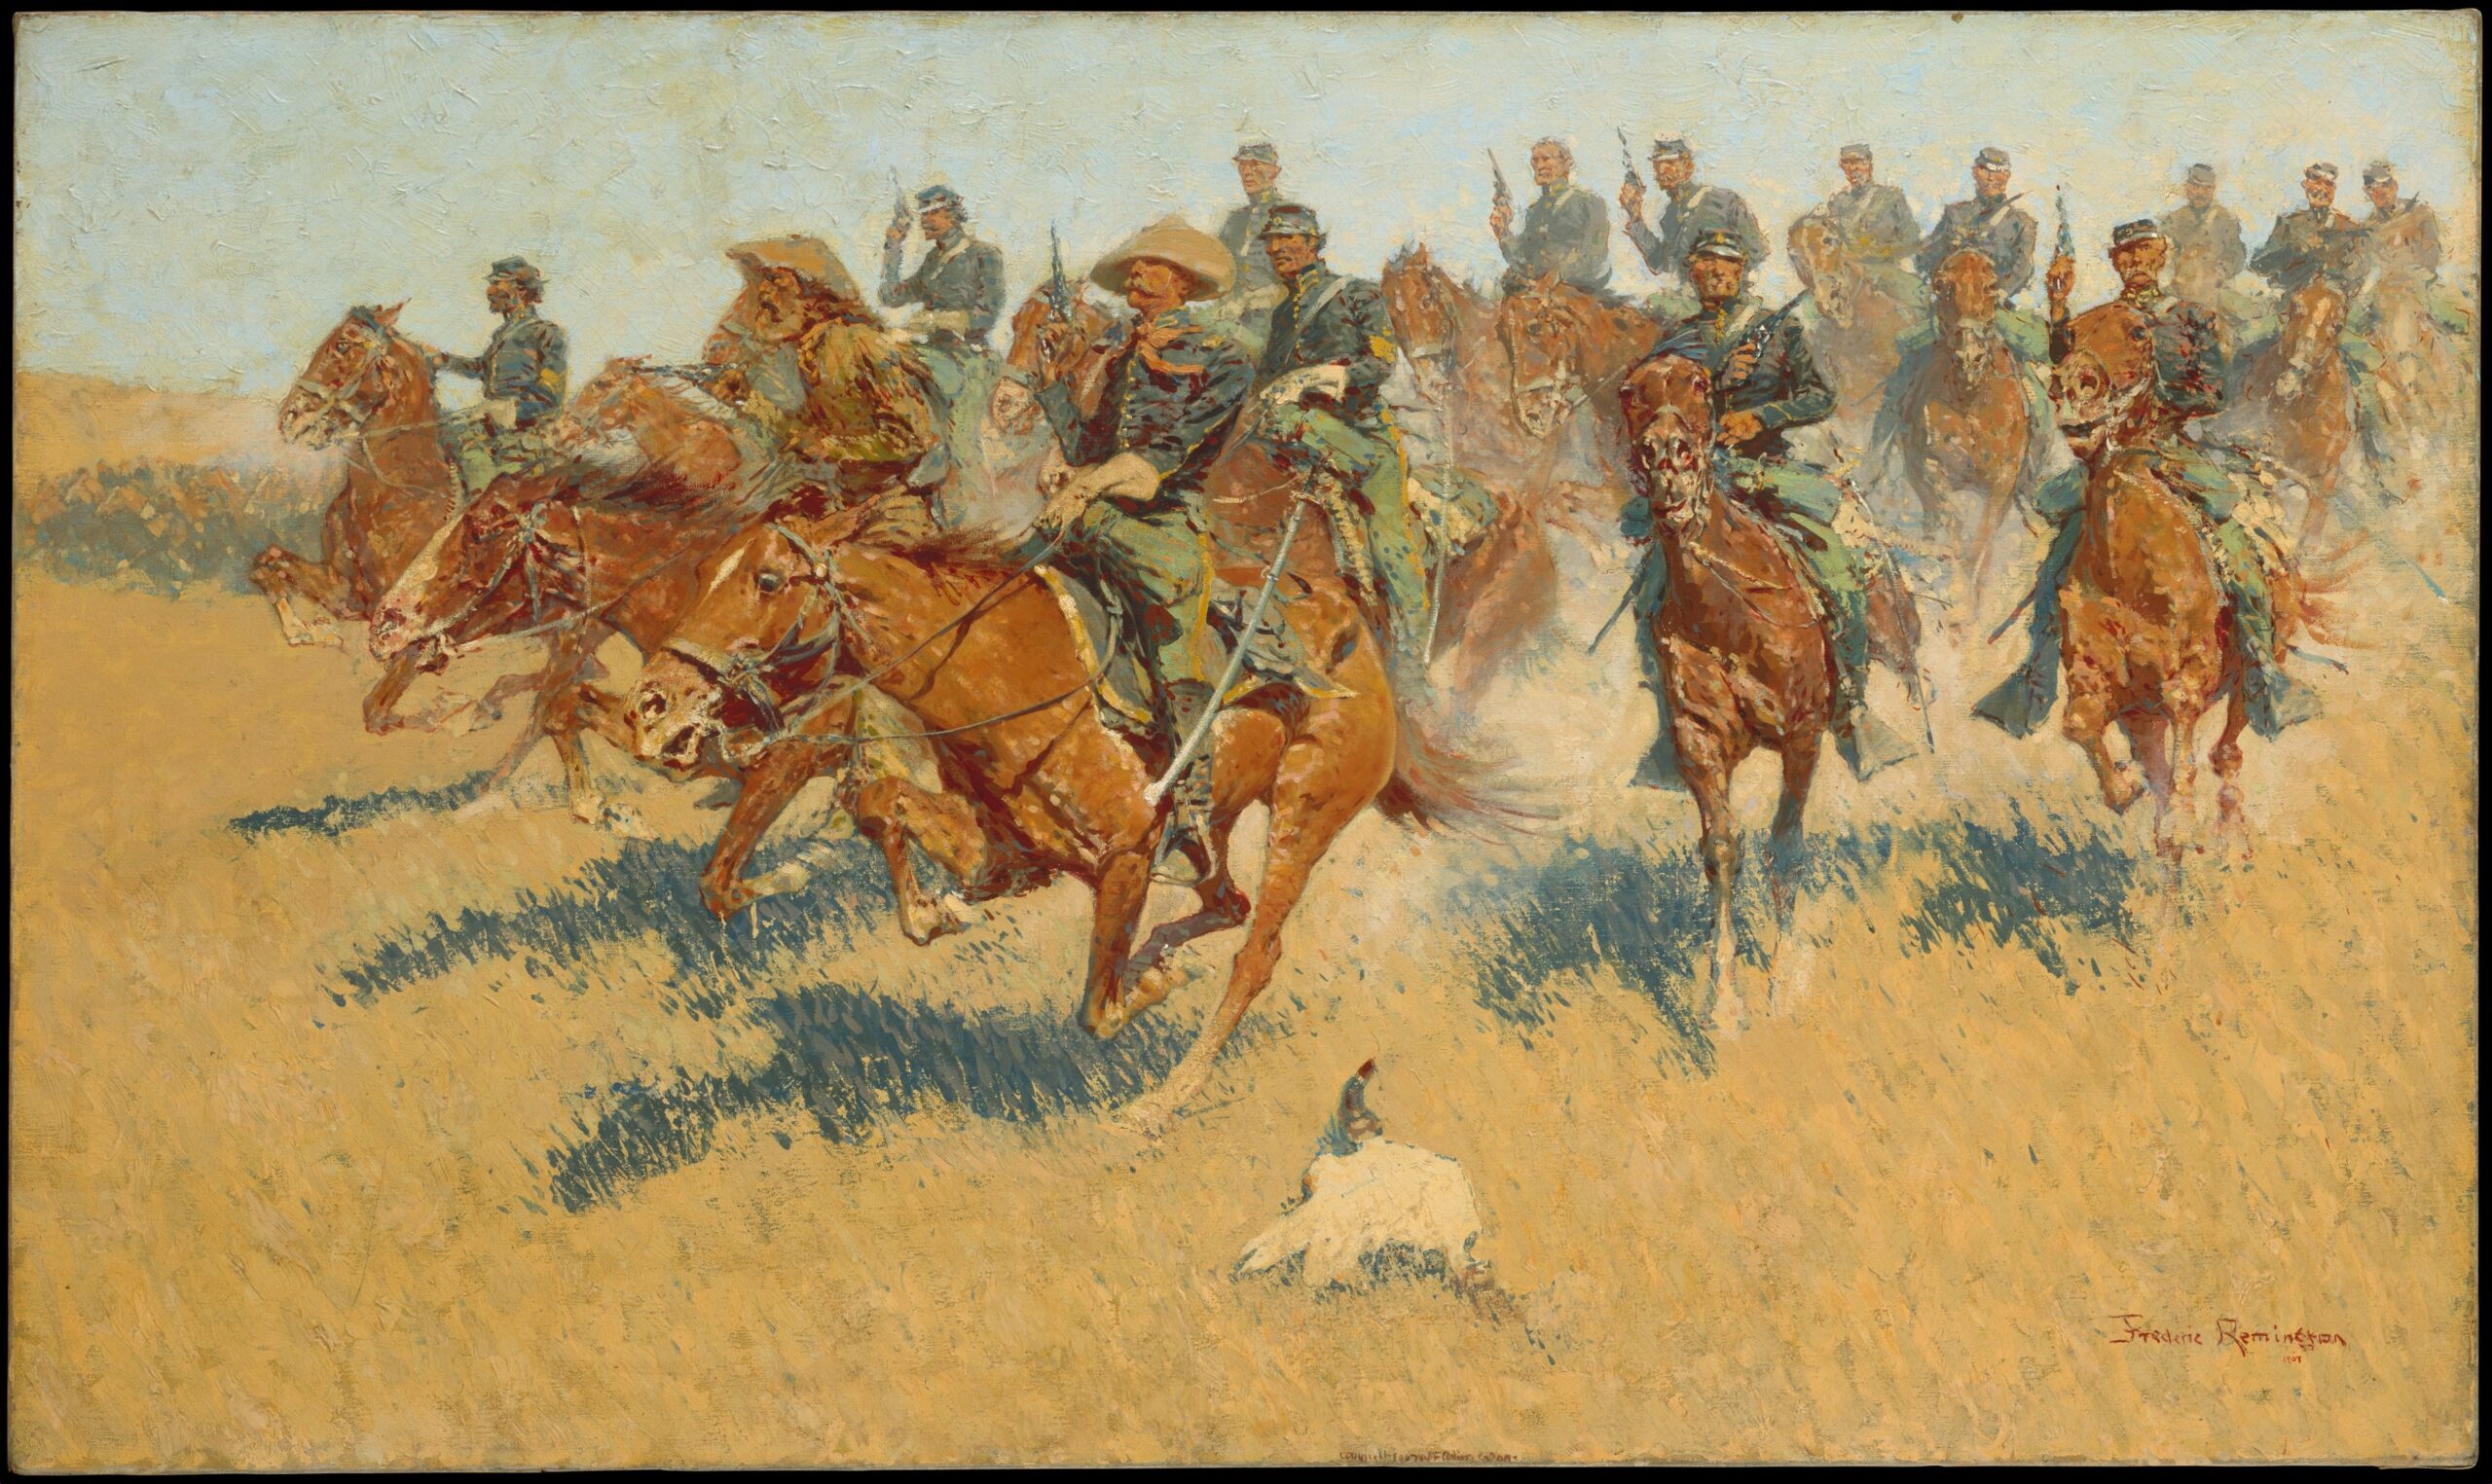 Painting of soldiers on horseback in the American West.